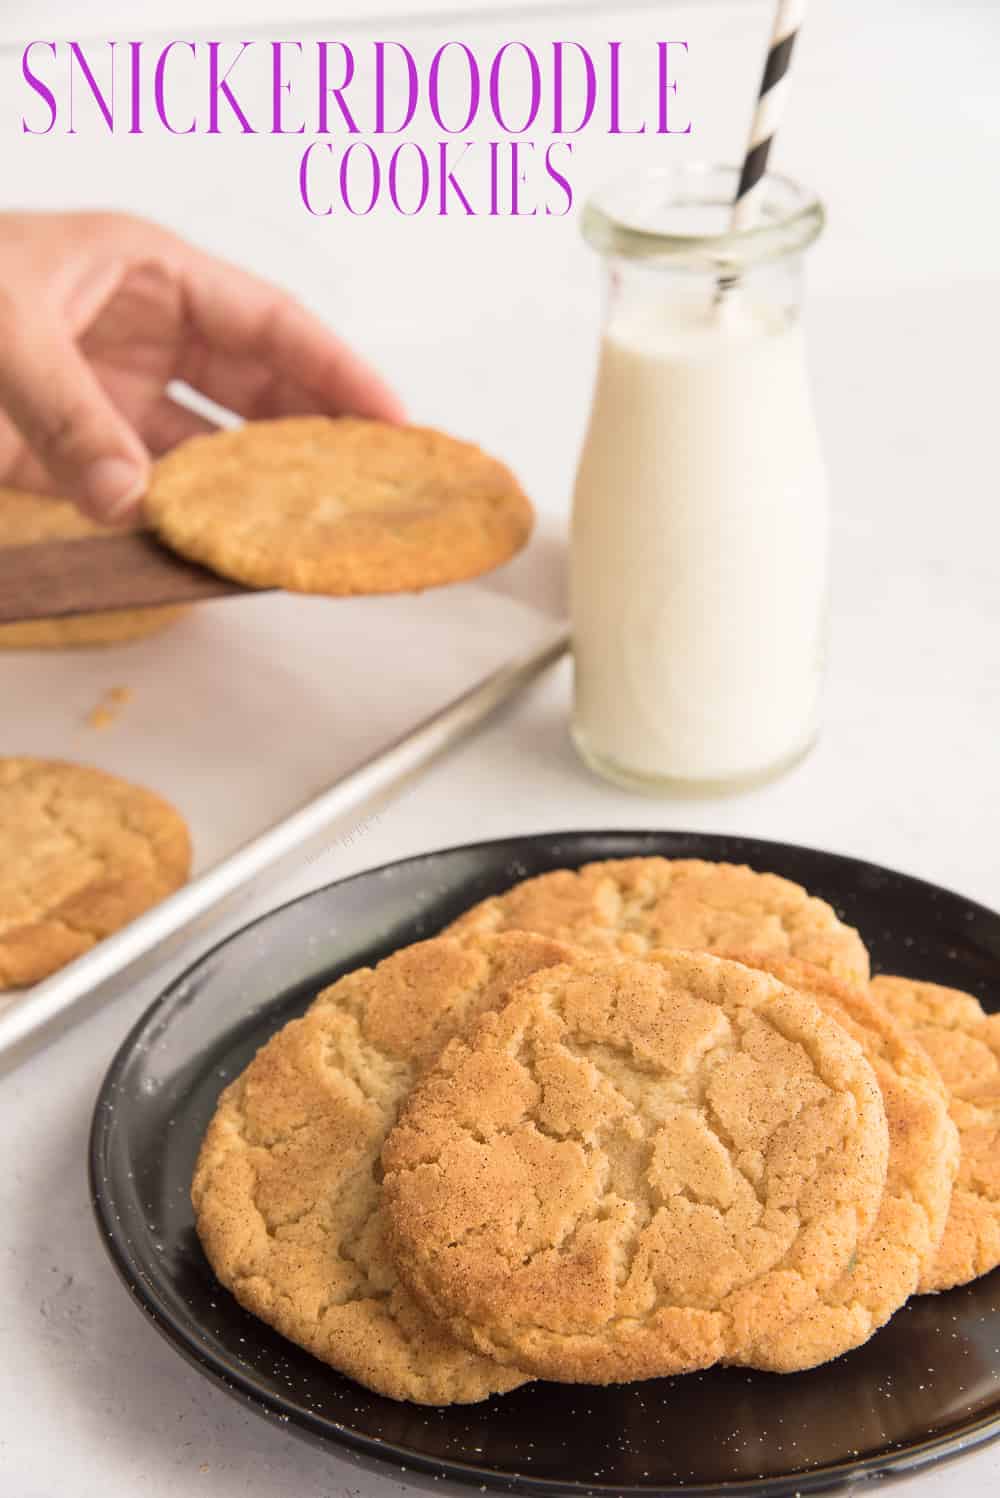 Snickerdoodle Cookies that are crisp on the edges, but chewy in the center are what dessert is missing. They're buttery, cinnamony, and perfectly sweet. #snickerdoodlecookies #cookies #cookiebaking #cookieexchange #holidaybaking #IversonMallsnickerdoodle #cookiedough #buttercookie #cinnamonsugar #freezerfriendly via @ediblesense